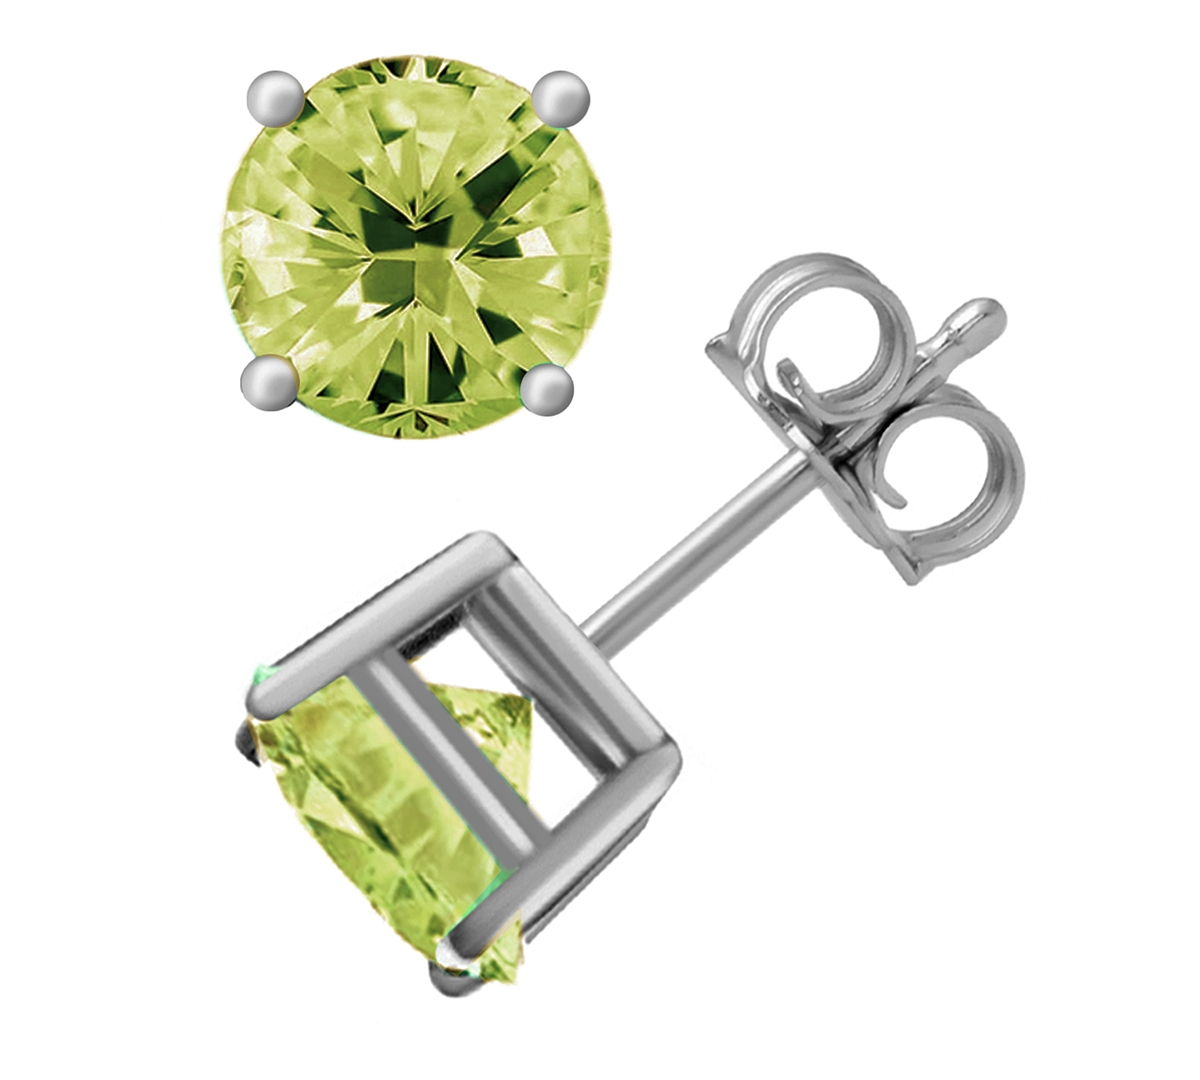 And Now This Glass Stone Stud Earrings in Silver-Plate - Peridot